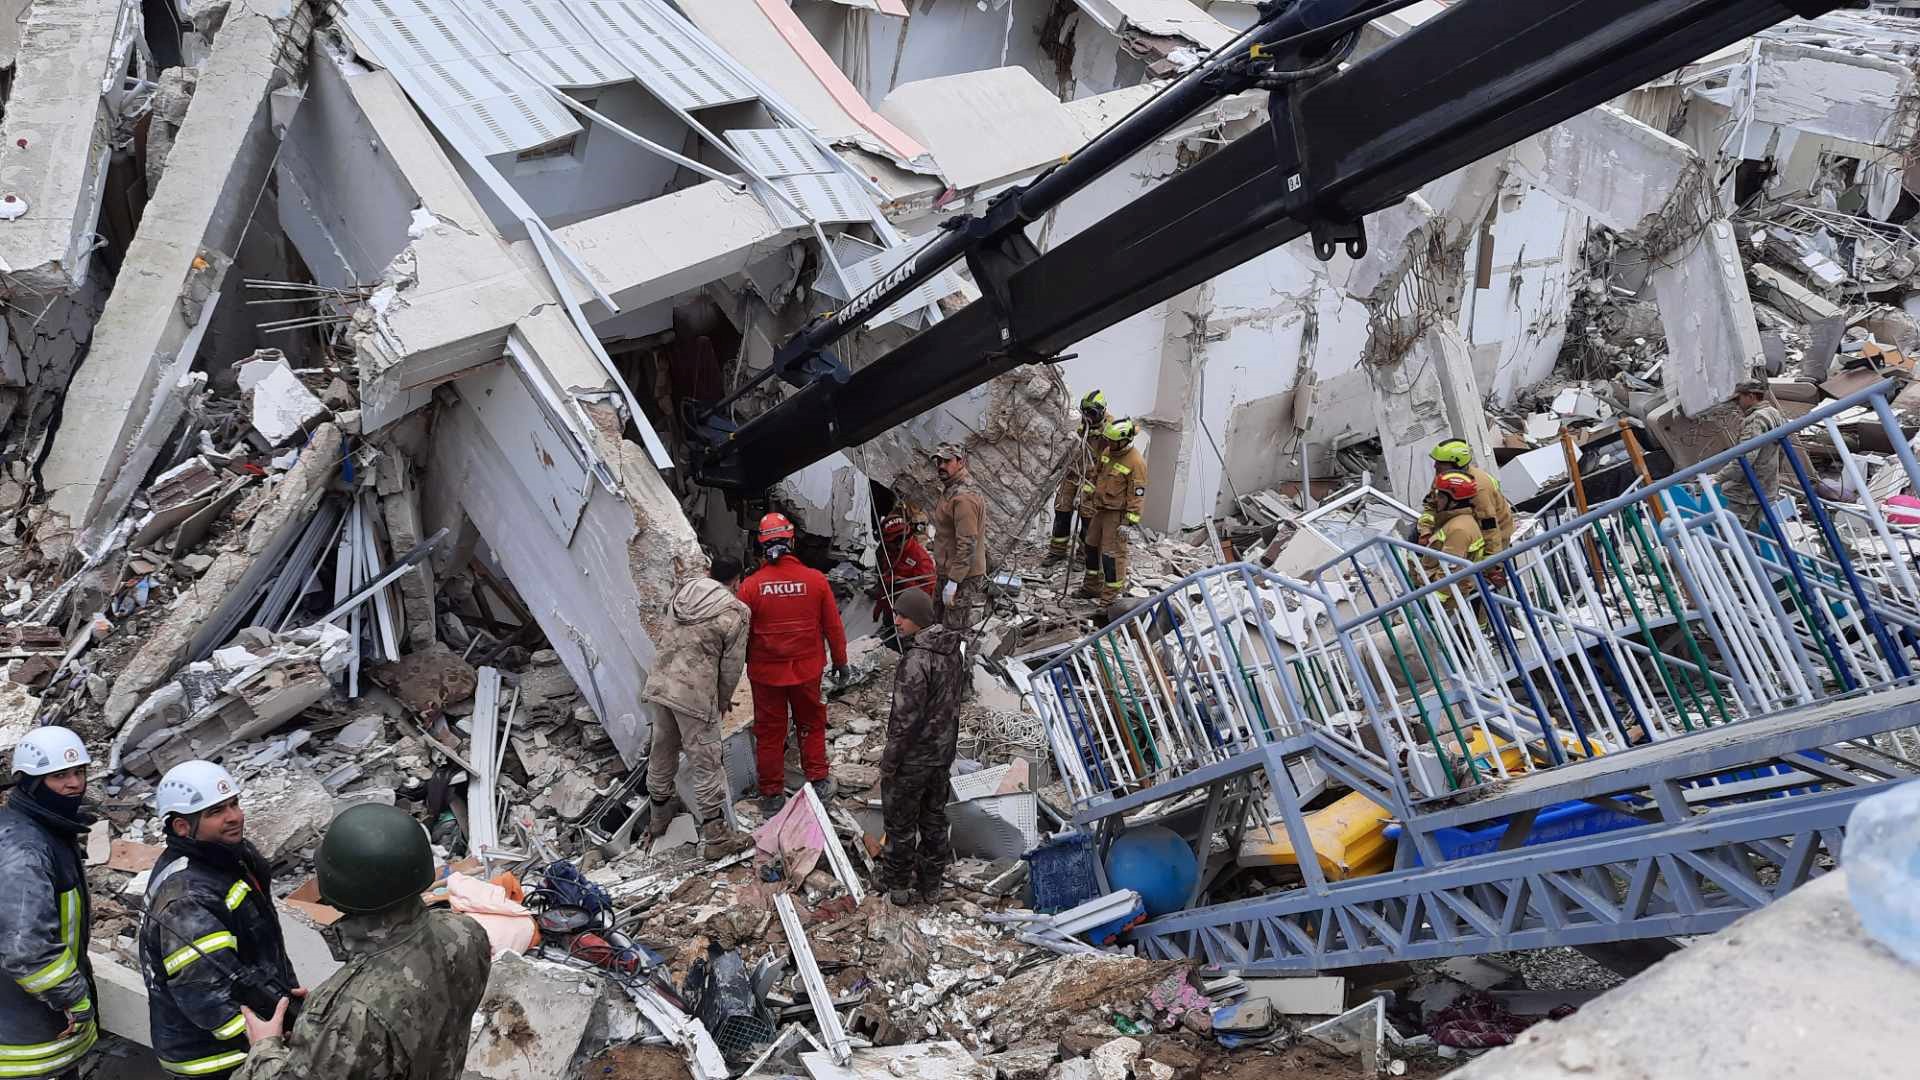 Update: Survivers Pulled from Quake Rubble by Hungarians in Turkey